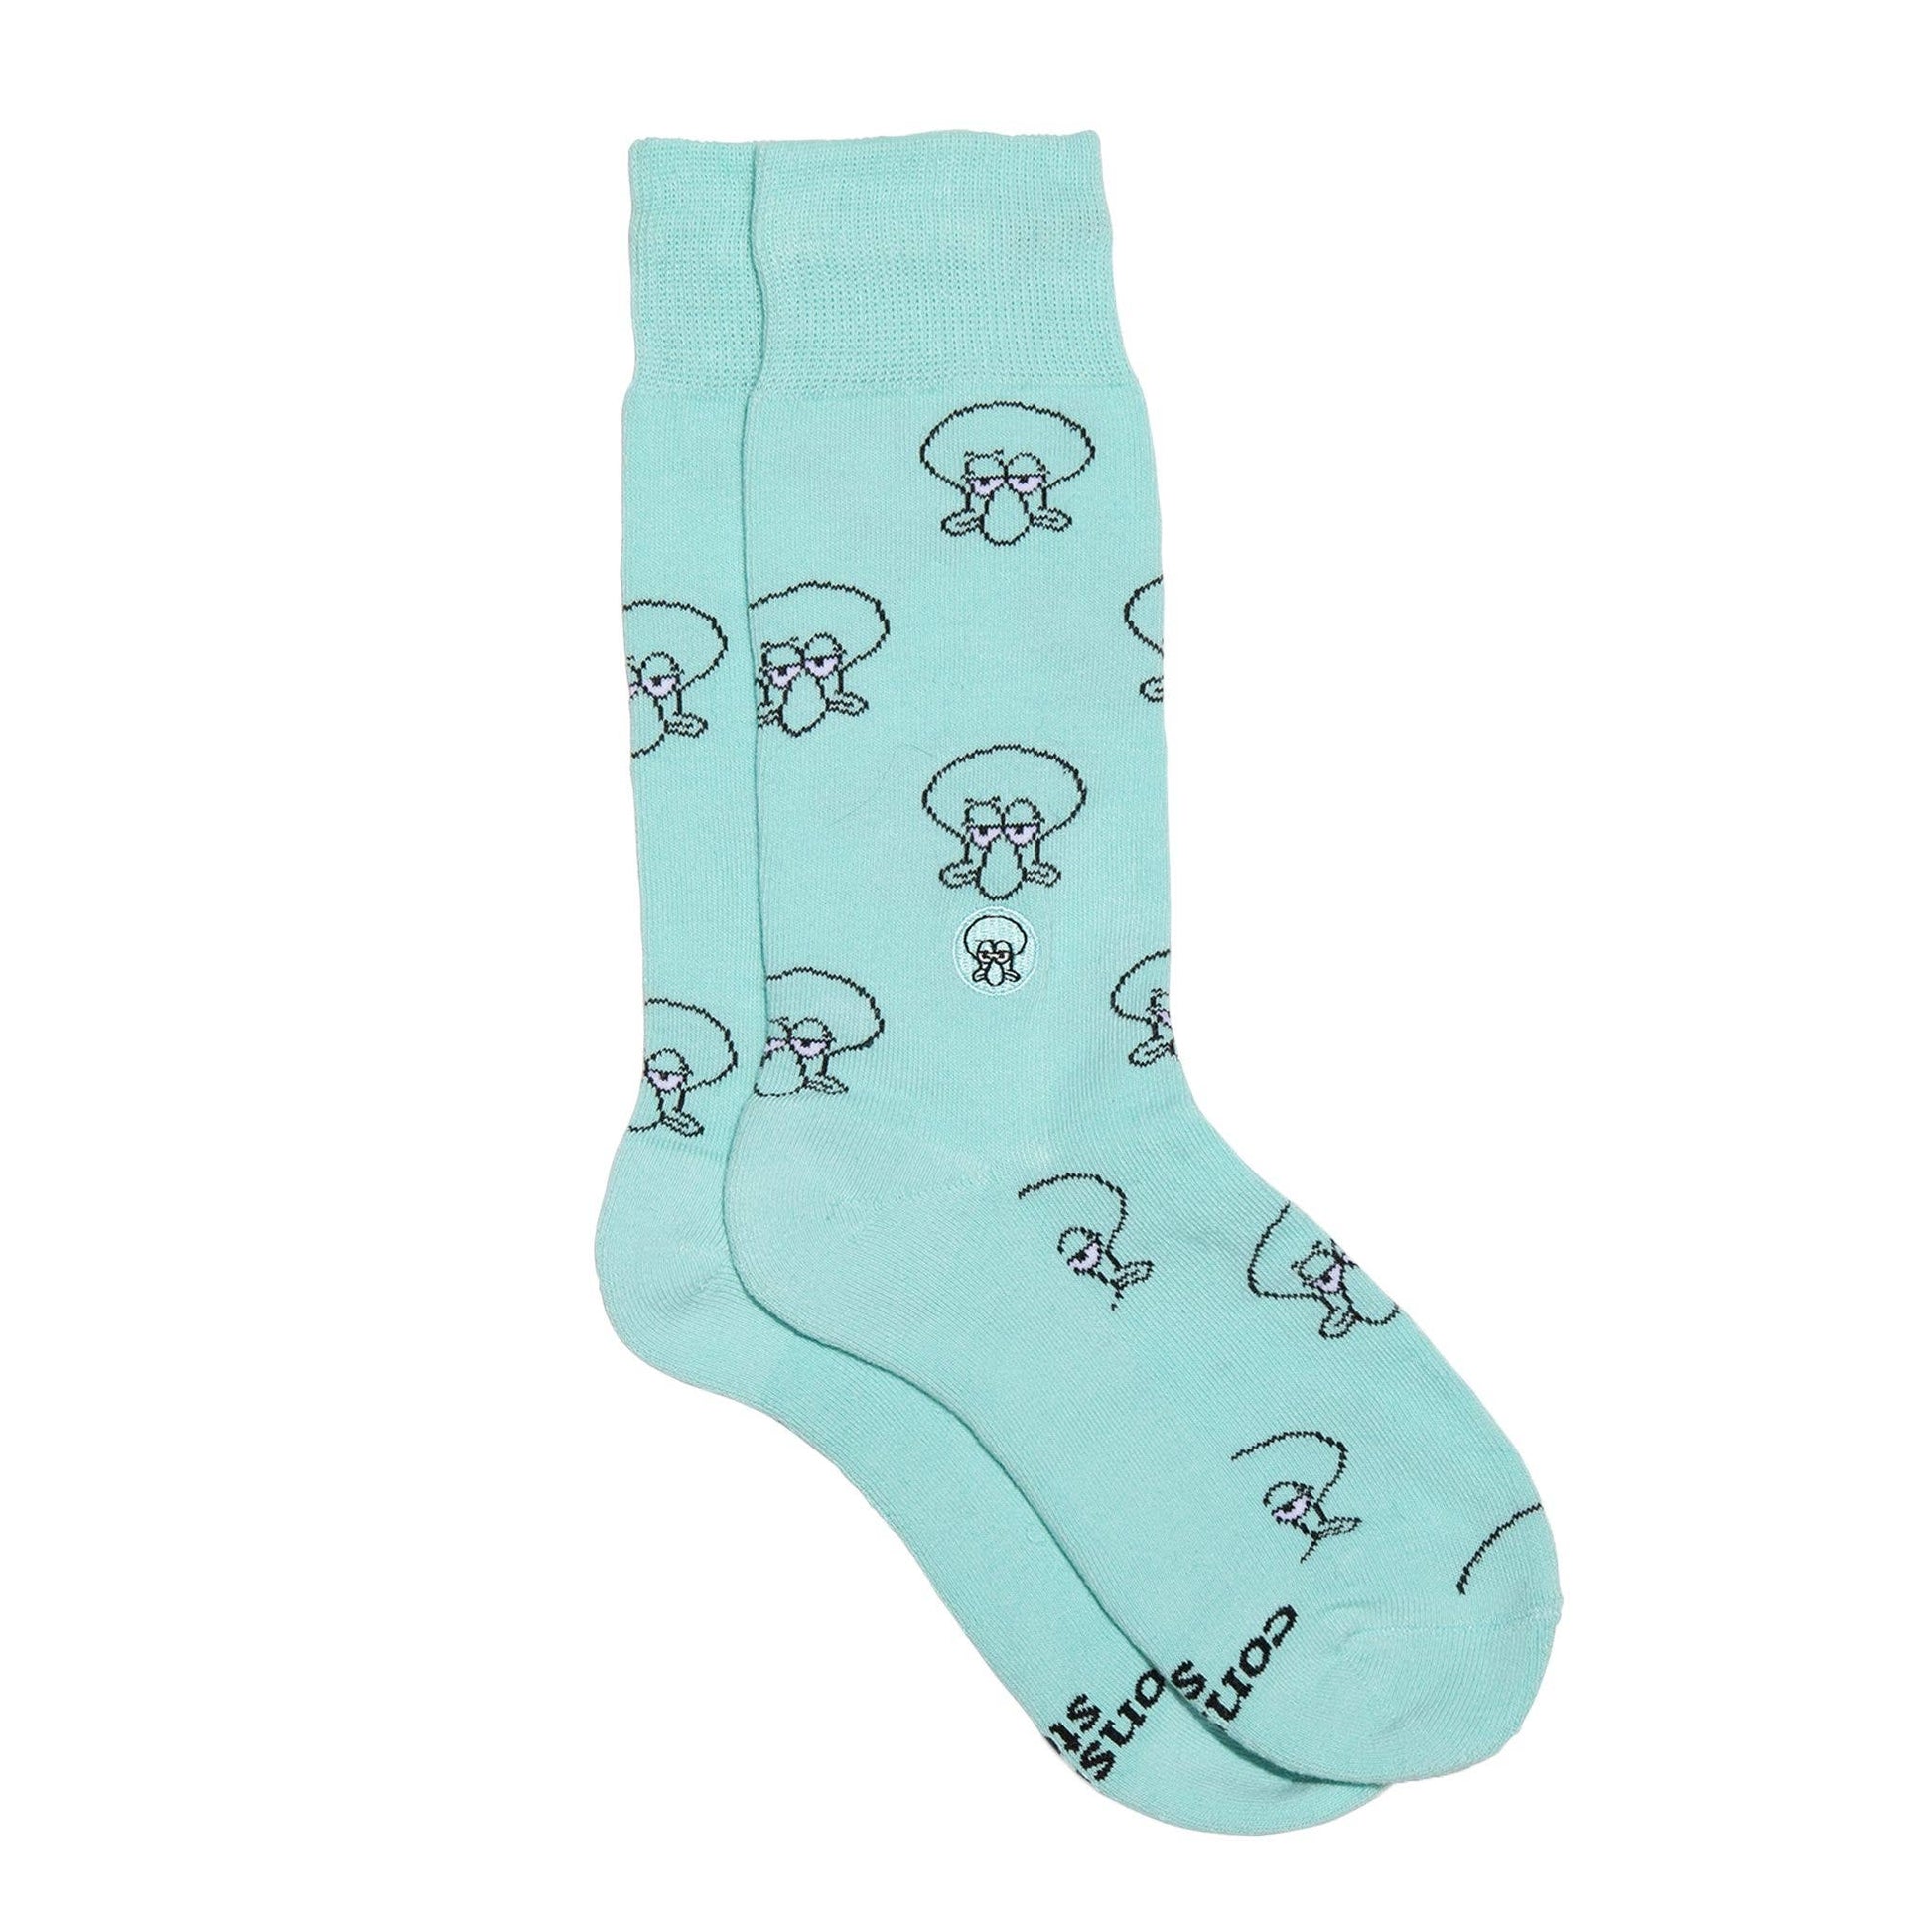 Conscious Step - Squidward Socks that Protect Oceans  Conscious Step   -better made easy-eco-friendly-sustainable-gifting